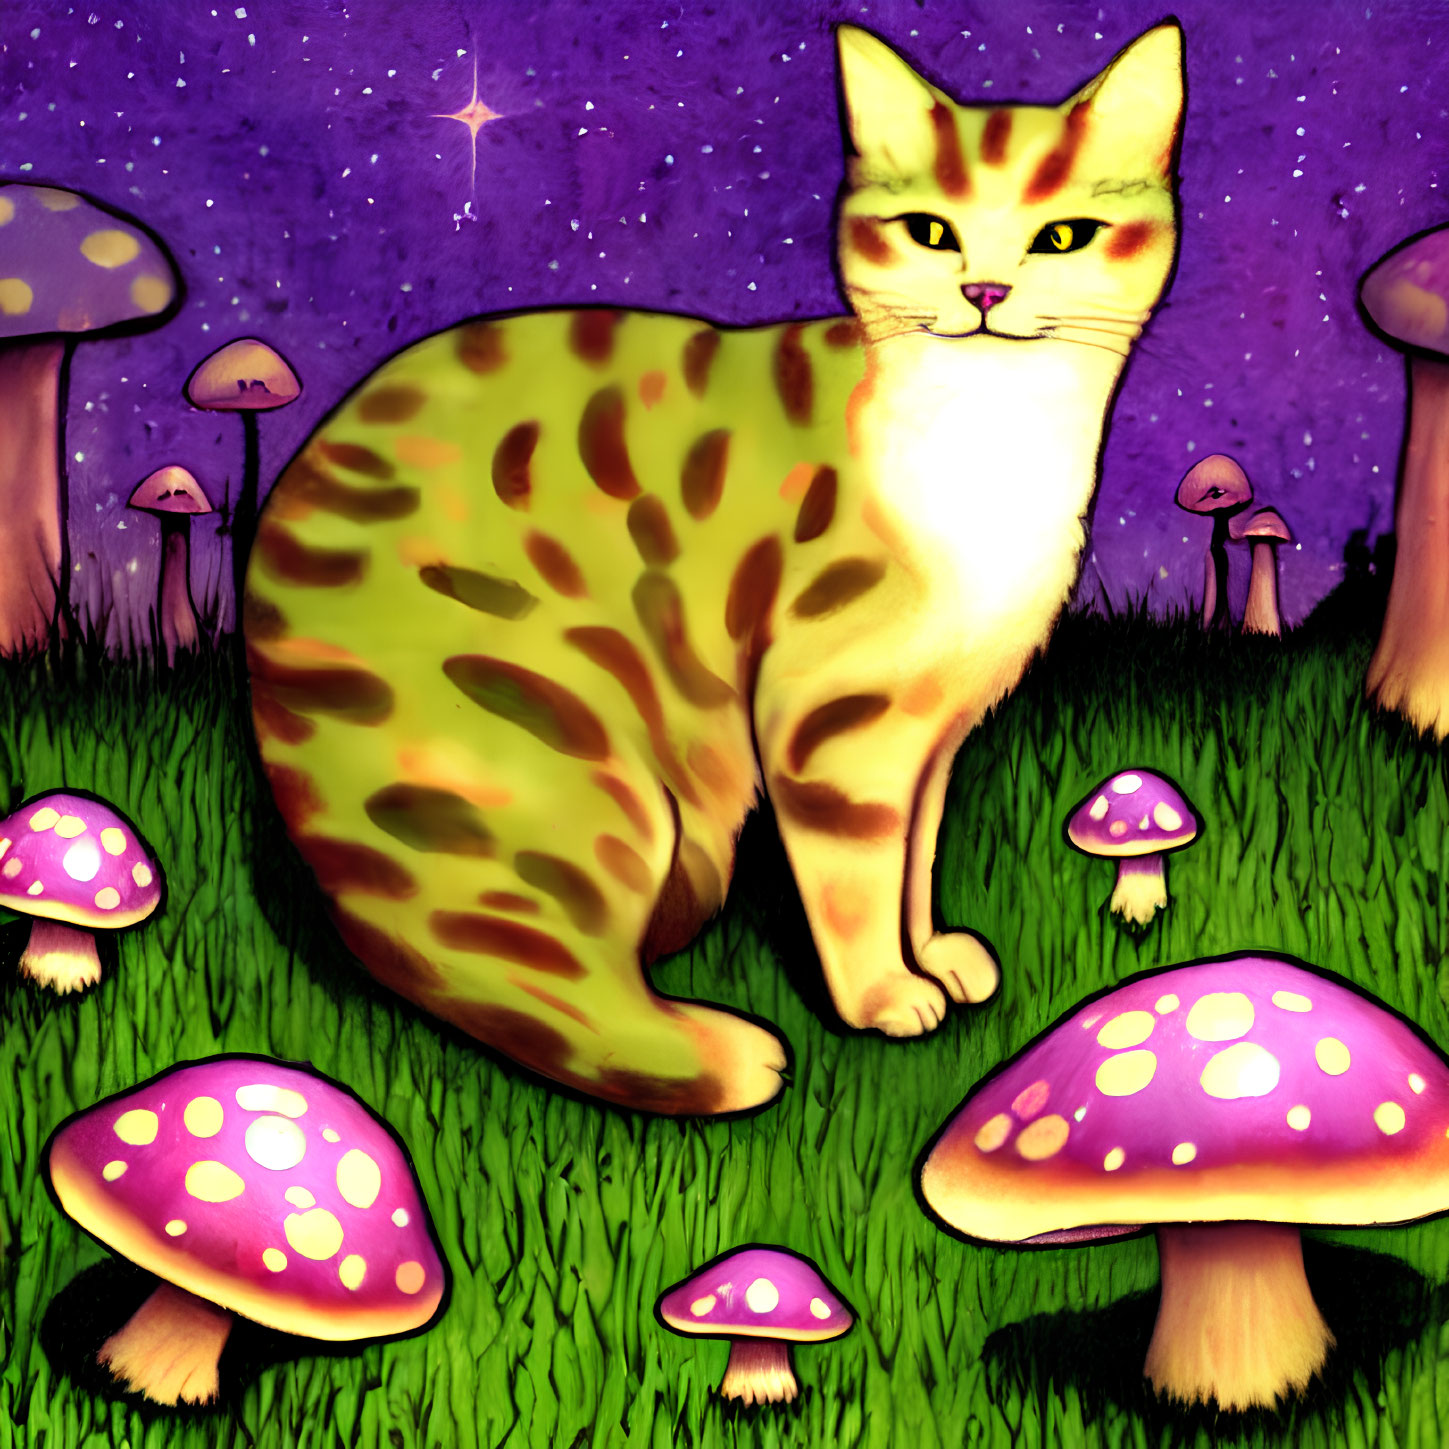 Spotted cat with purple mushrooms under starry sky